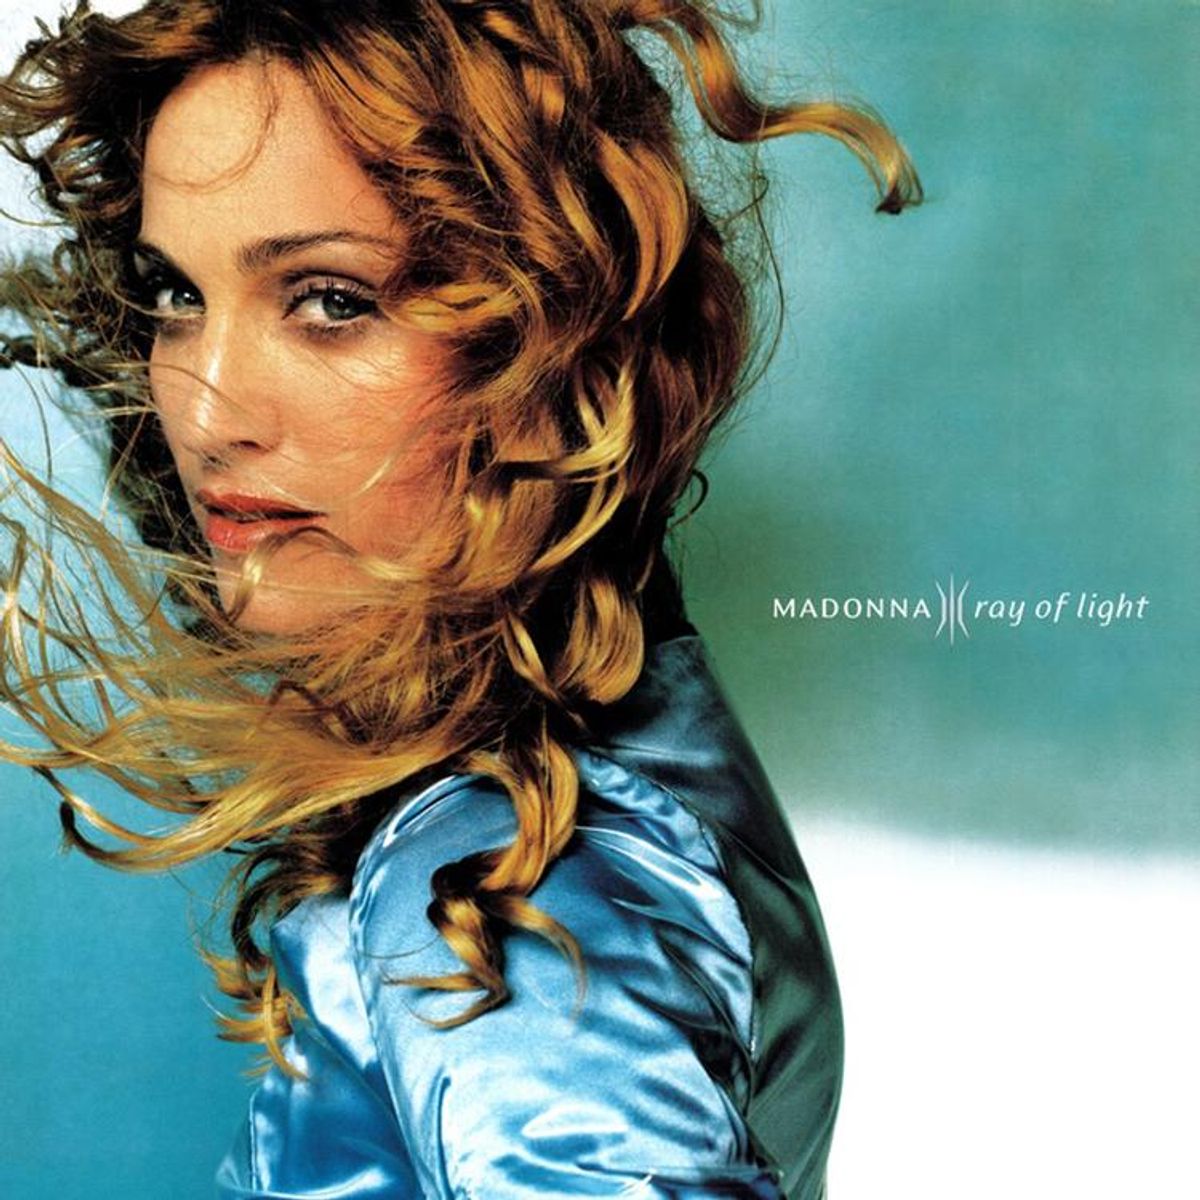 Oh Shanti! Gay Fans Get Misty as Madonna's 'Ray of Light' Turns 20